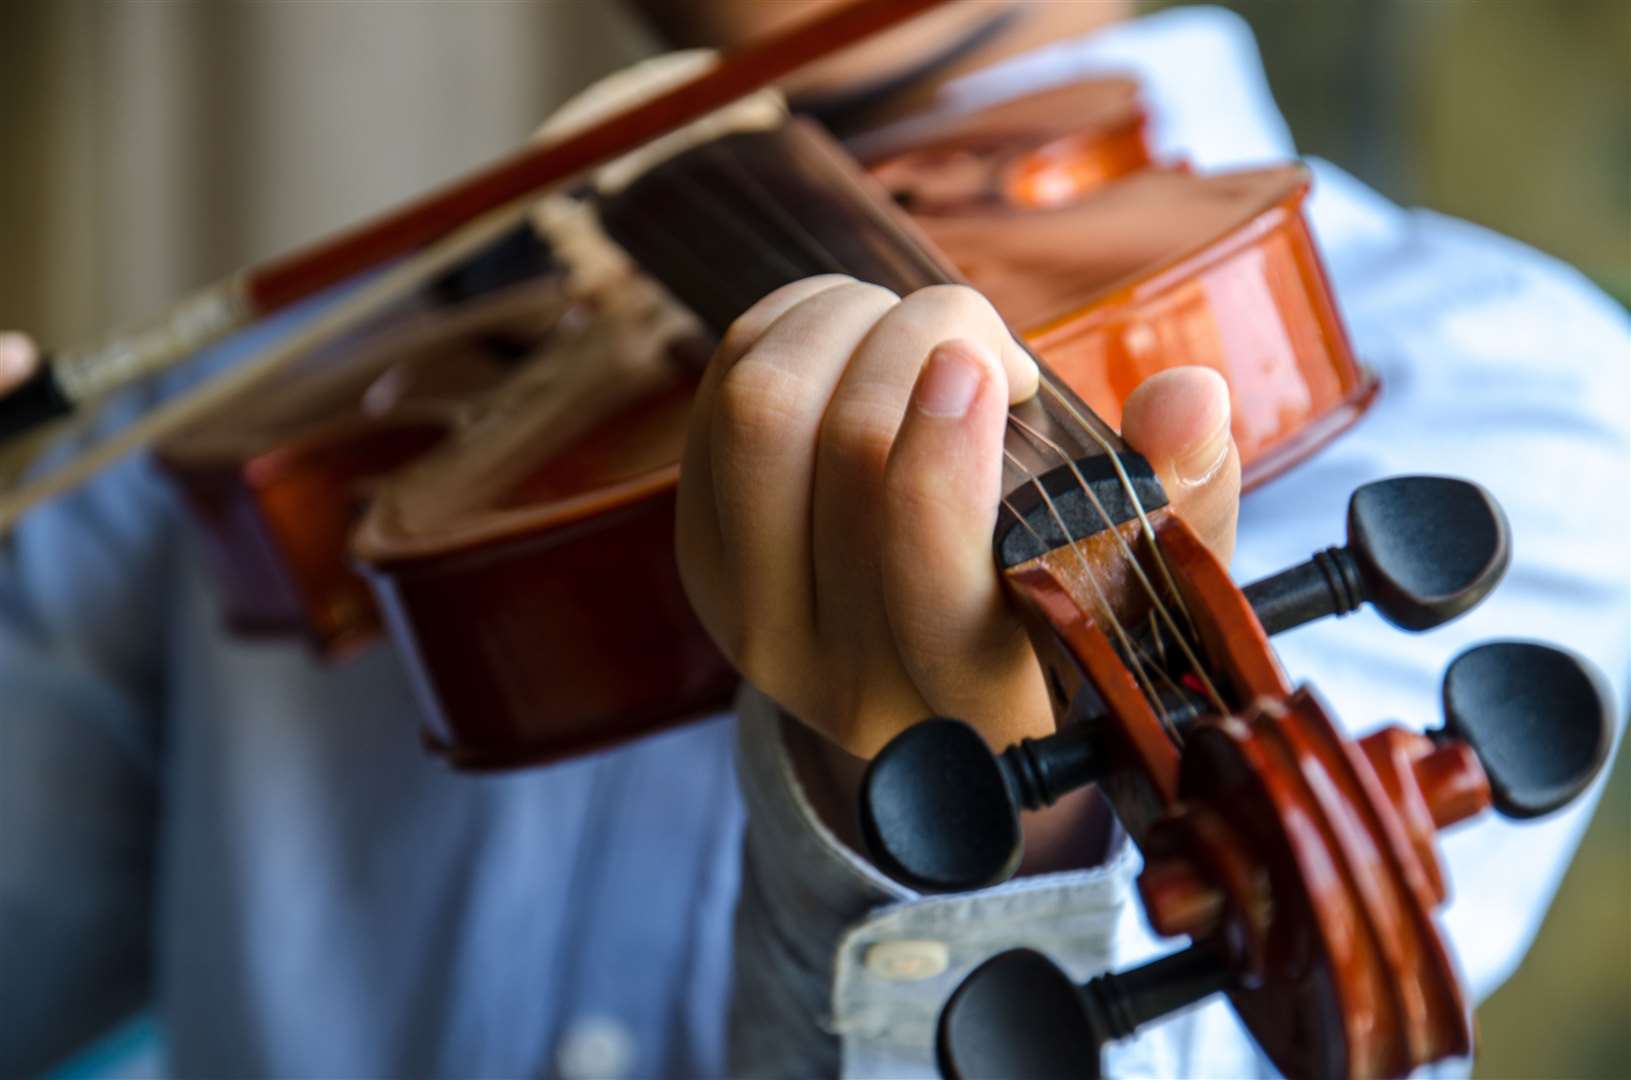 Fiddle is just one of the instruments youngsters can learn at the week-long Fèis a' Bhaile classes.